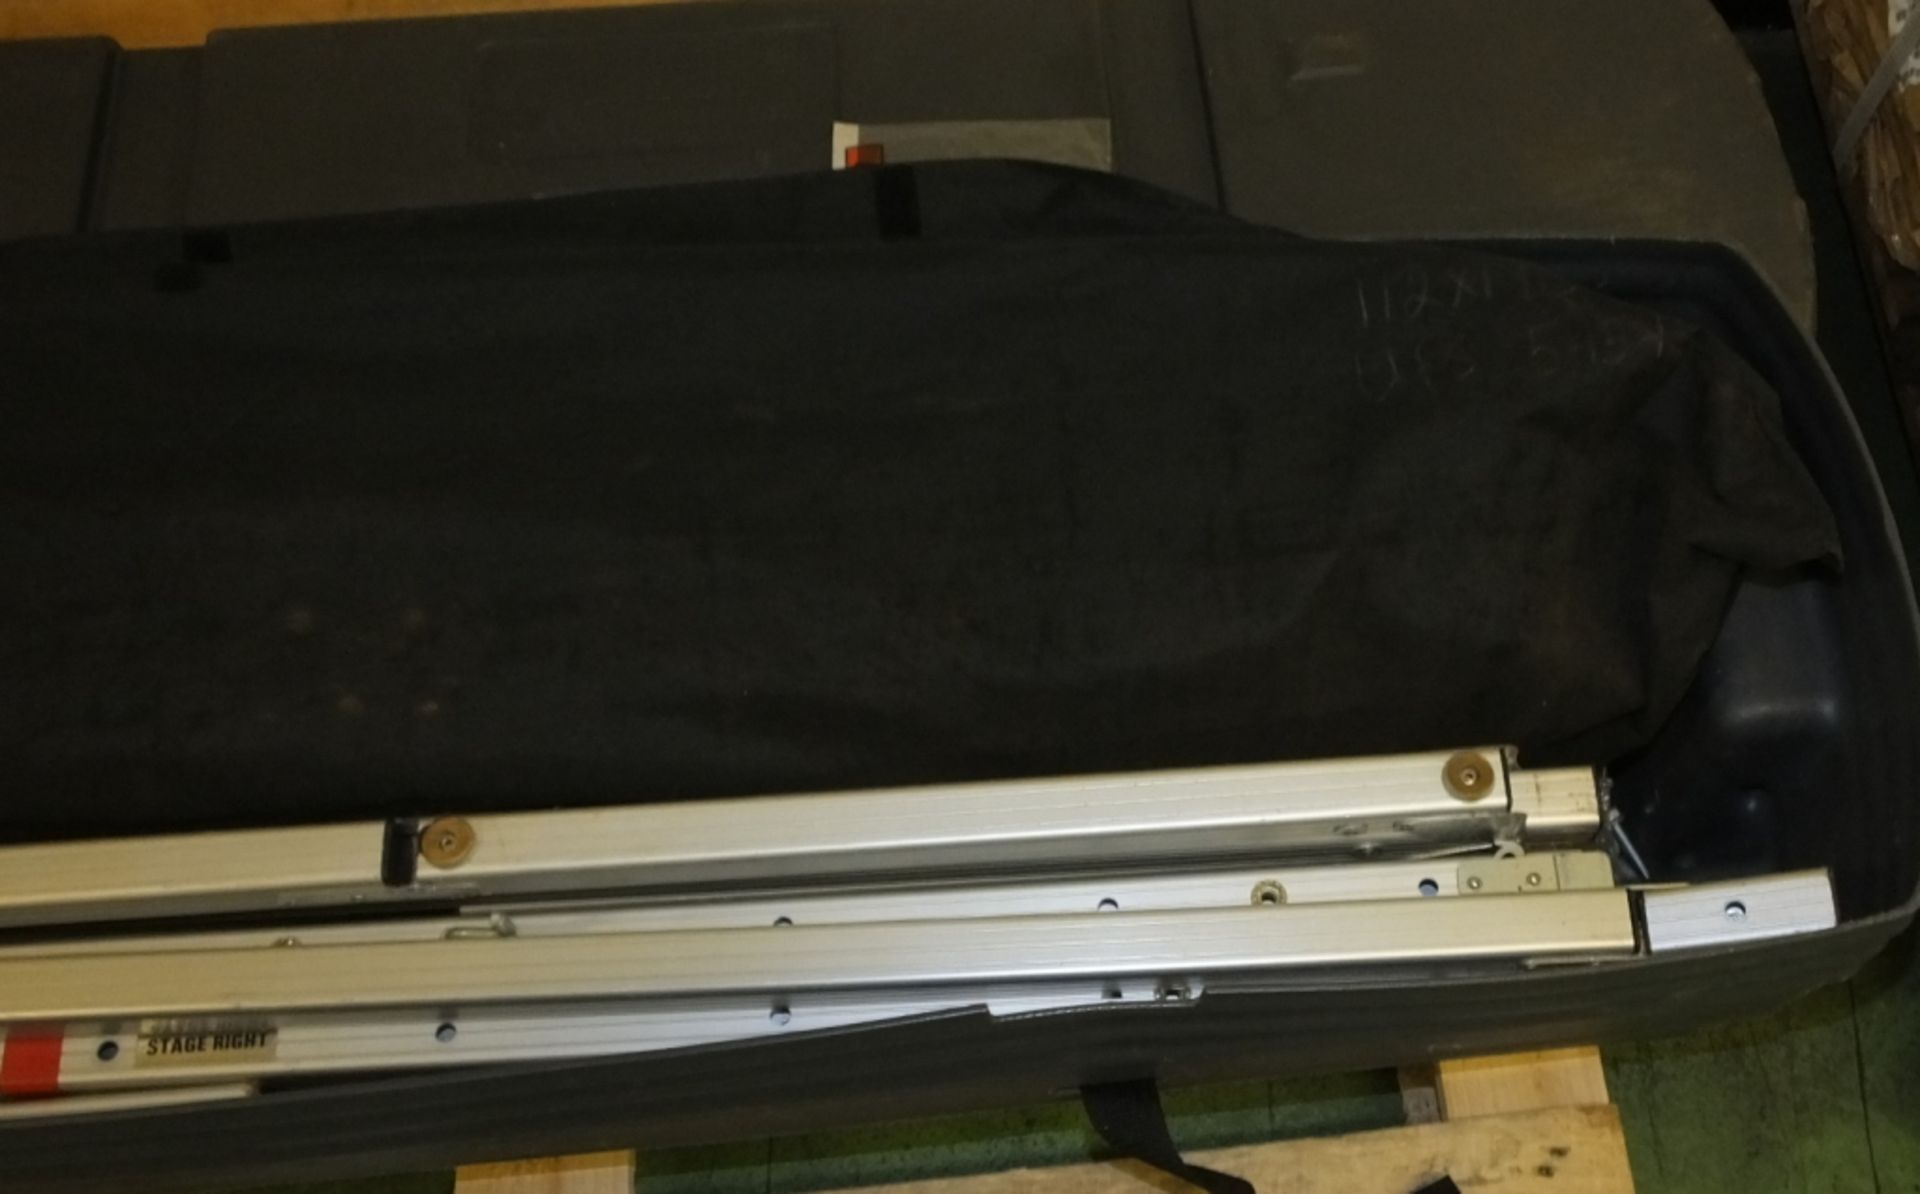 Draper Cinefold Projection Screen assembly in carry case - Image 3 of 6